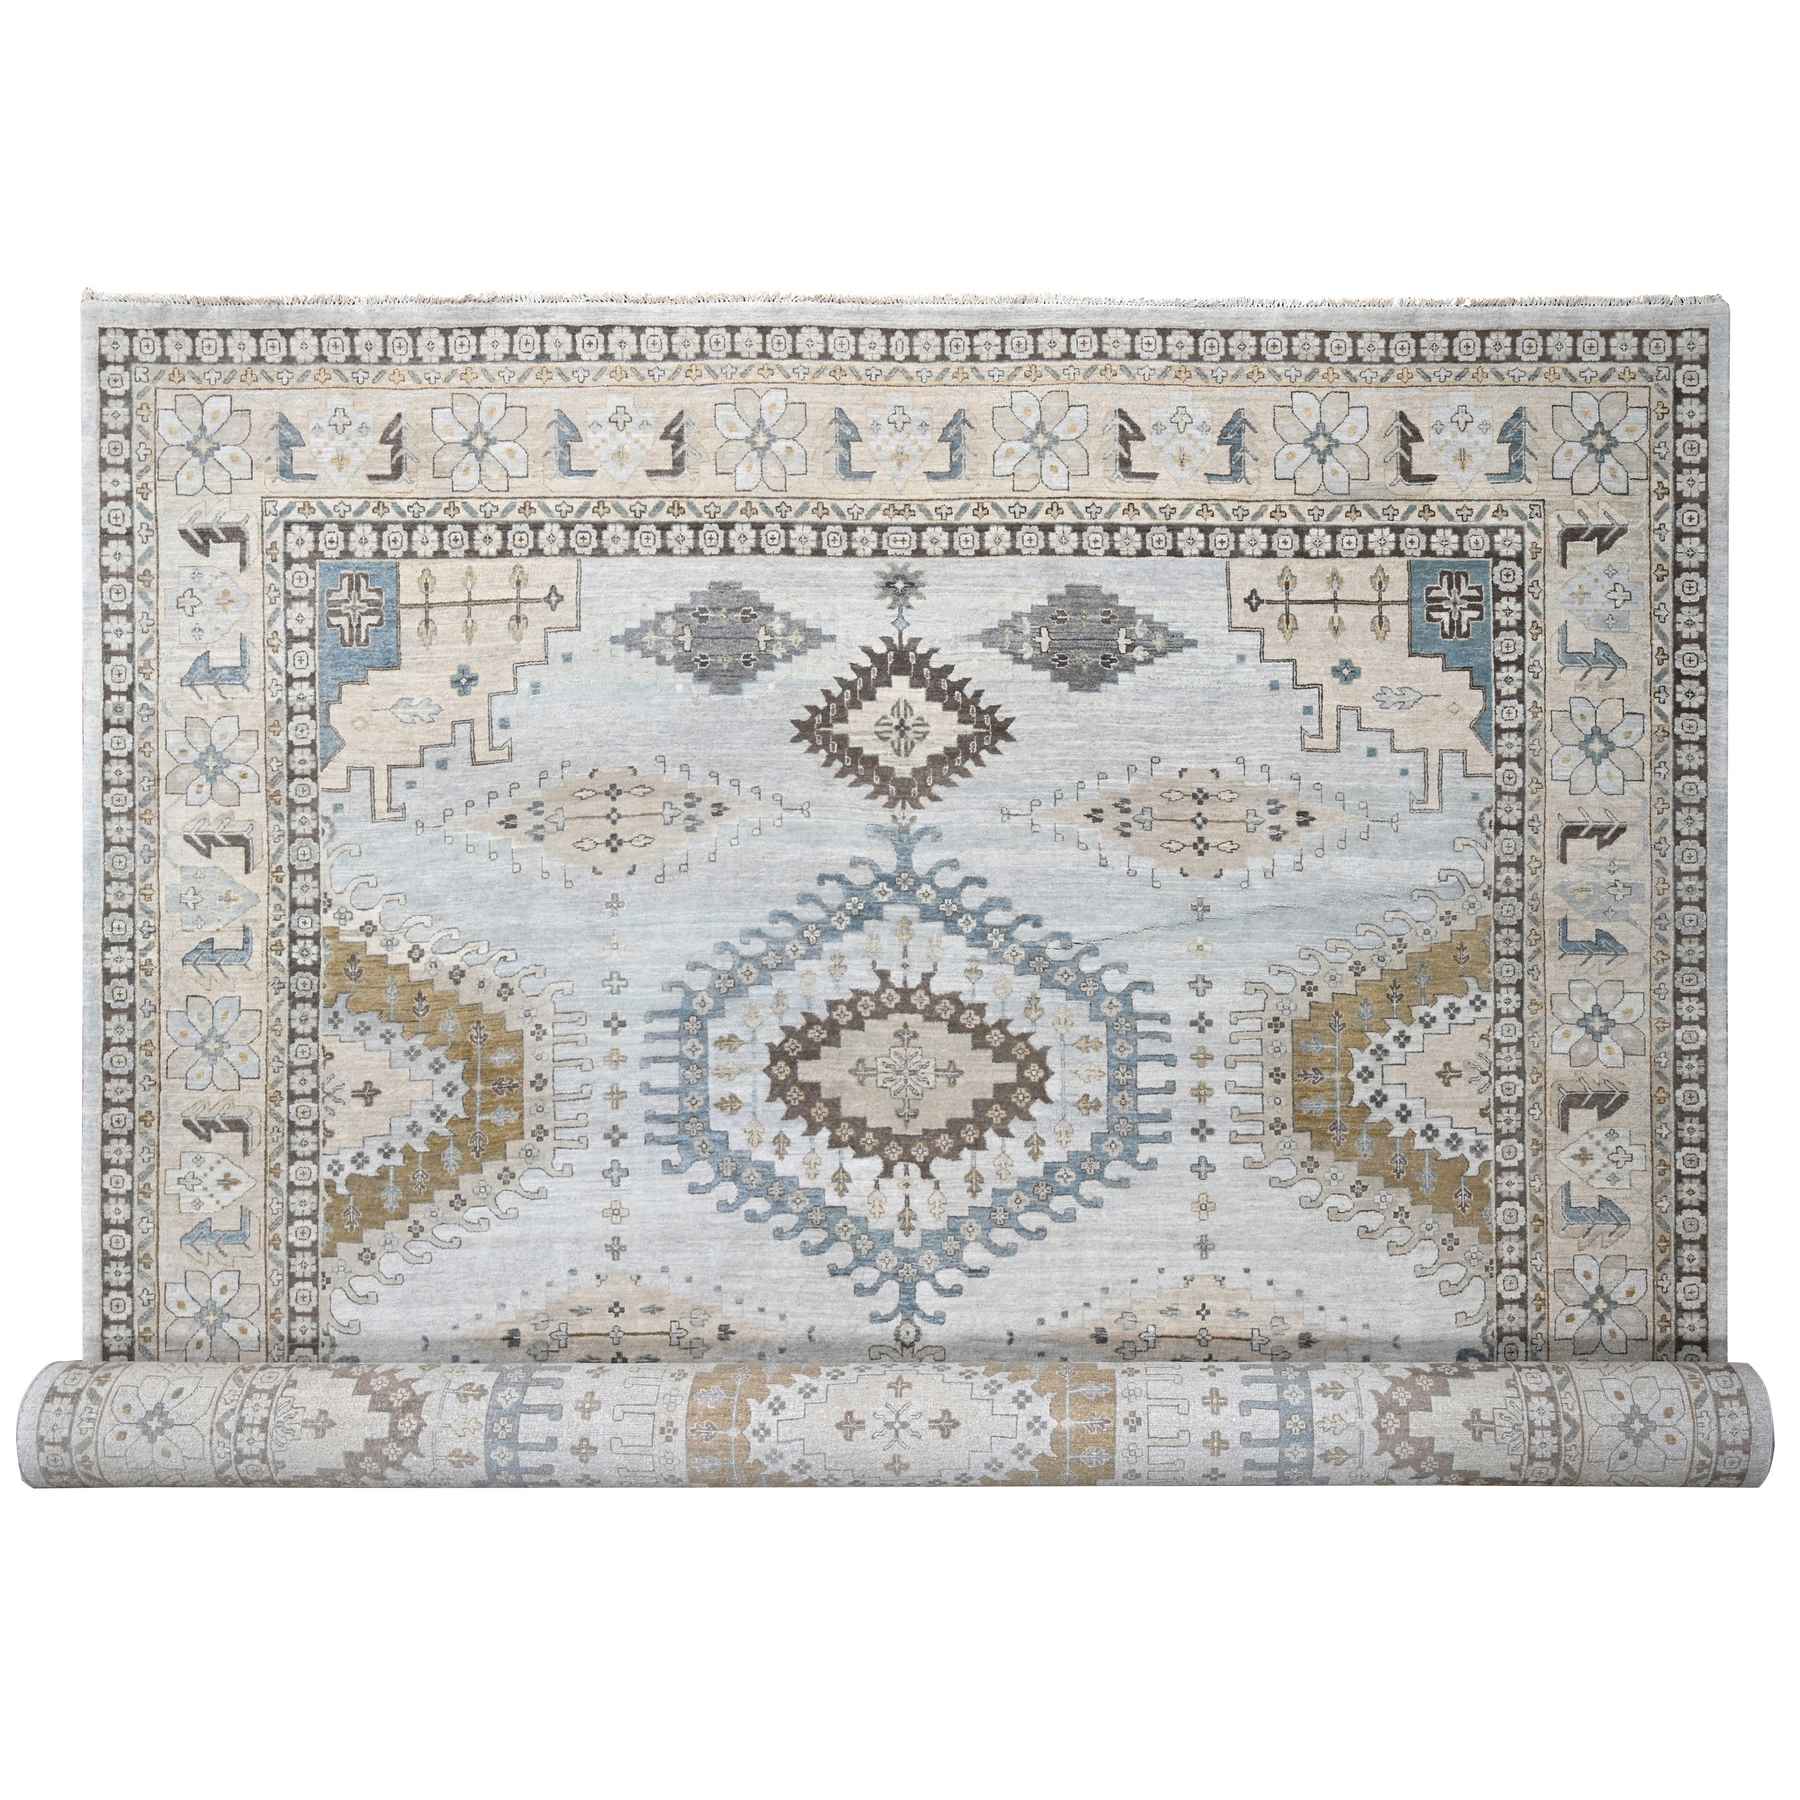 Solitude Gray, Hand Knotted, Persian Village Influence Design and Geometric Motifs Design, Shiny and Soft Wool, Natural Dyes, Densely Woven Oriental Oversized Rug